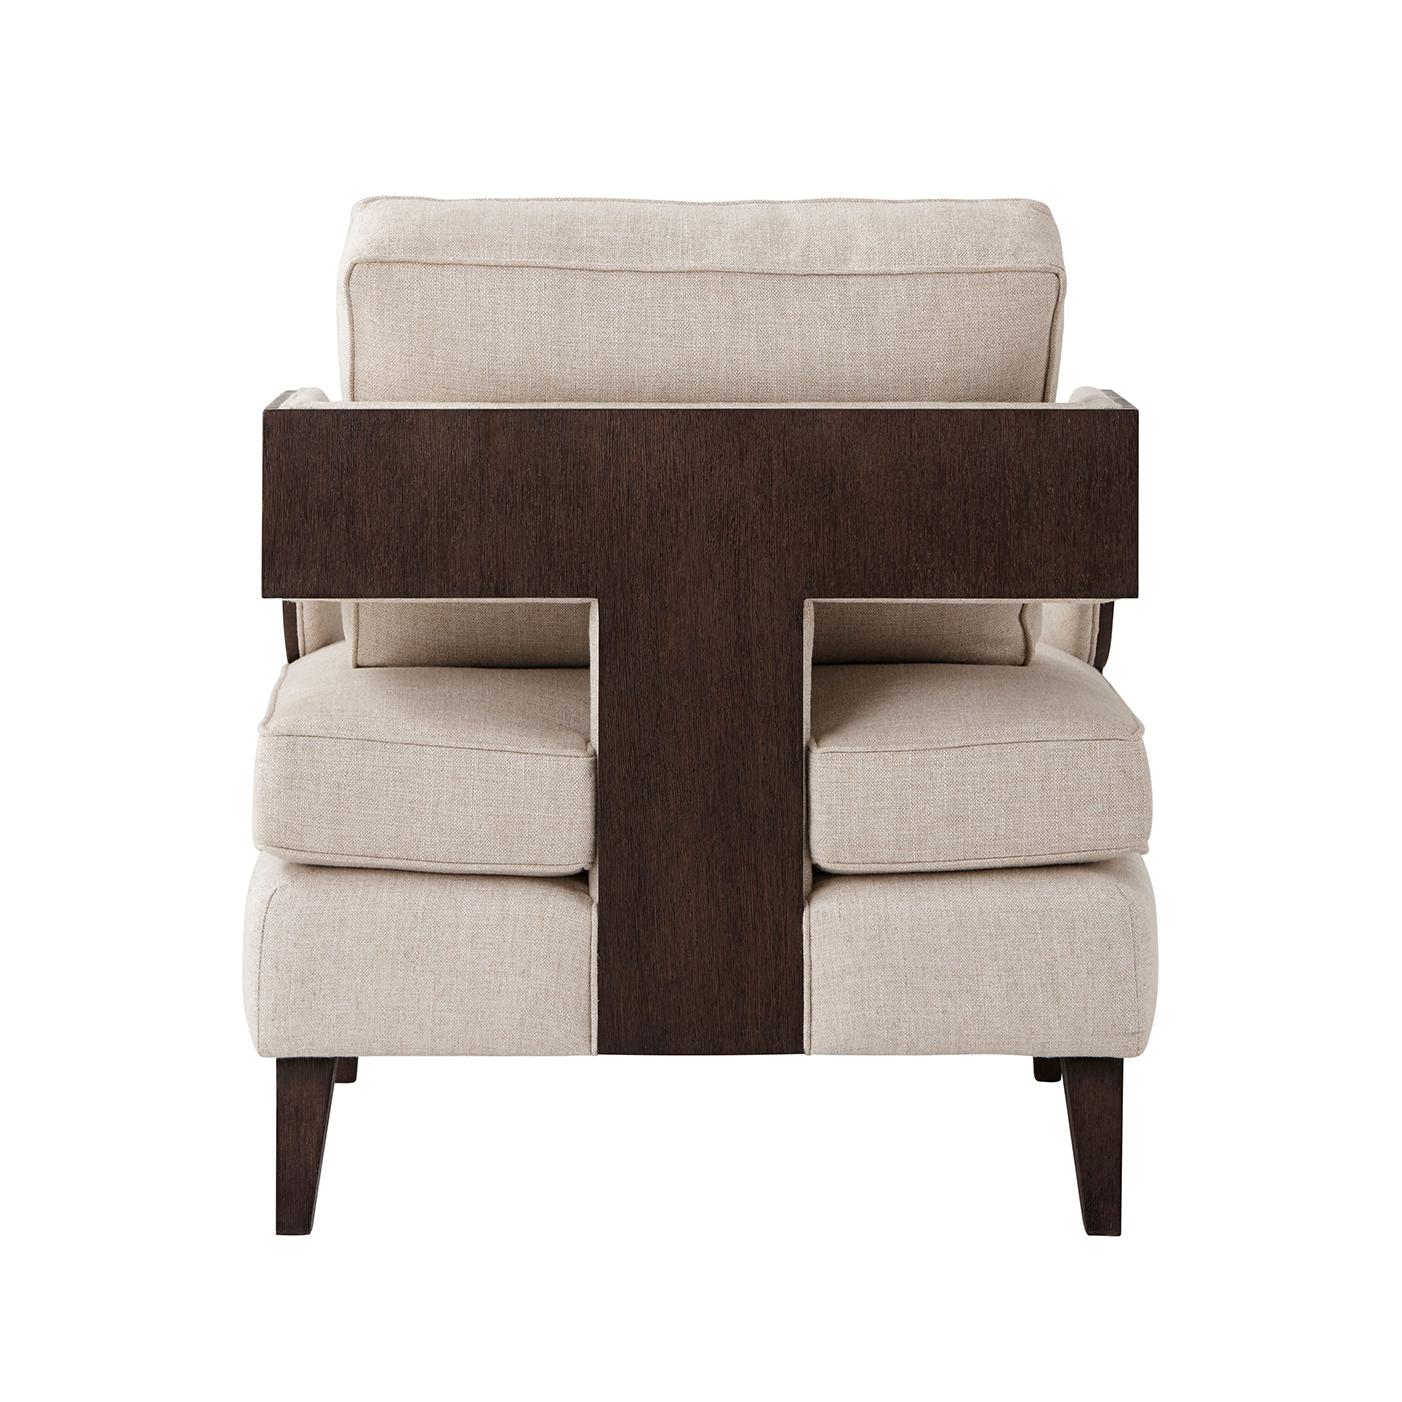 A Mid-Century Modern style upholstered club chair with loose cushion back and seat with our textured veneer outside frame and square tapered legs.

Dimensions: 31